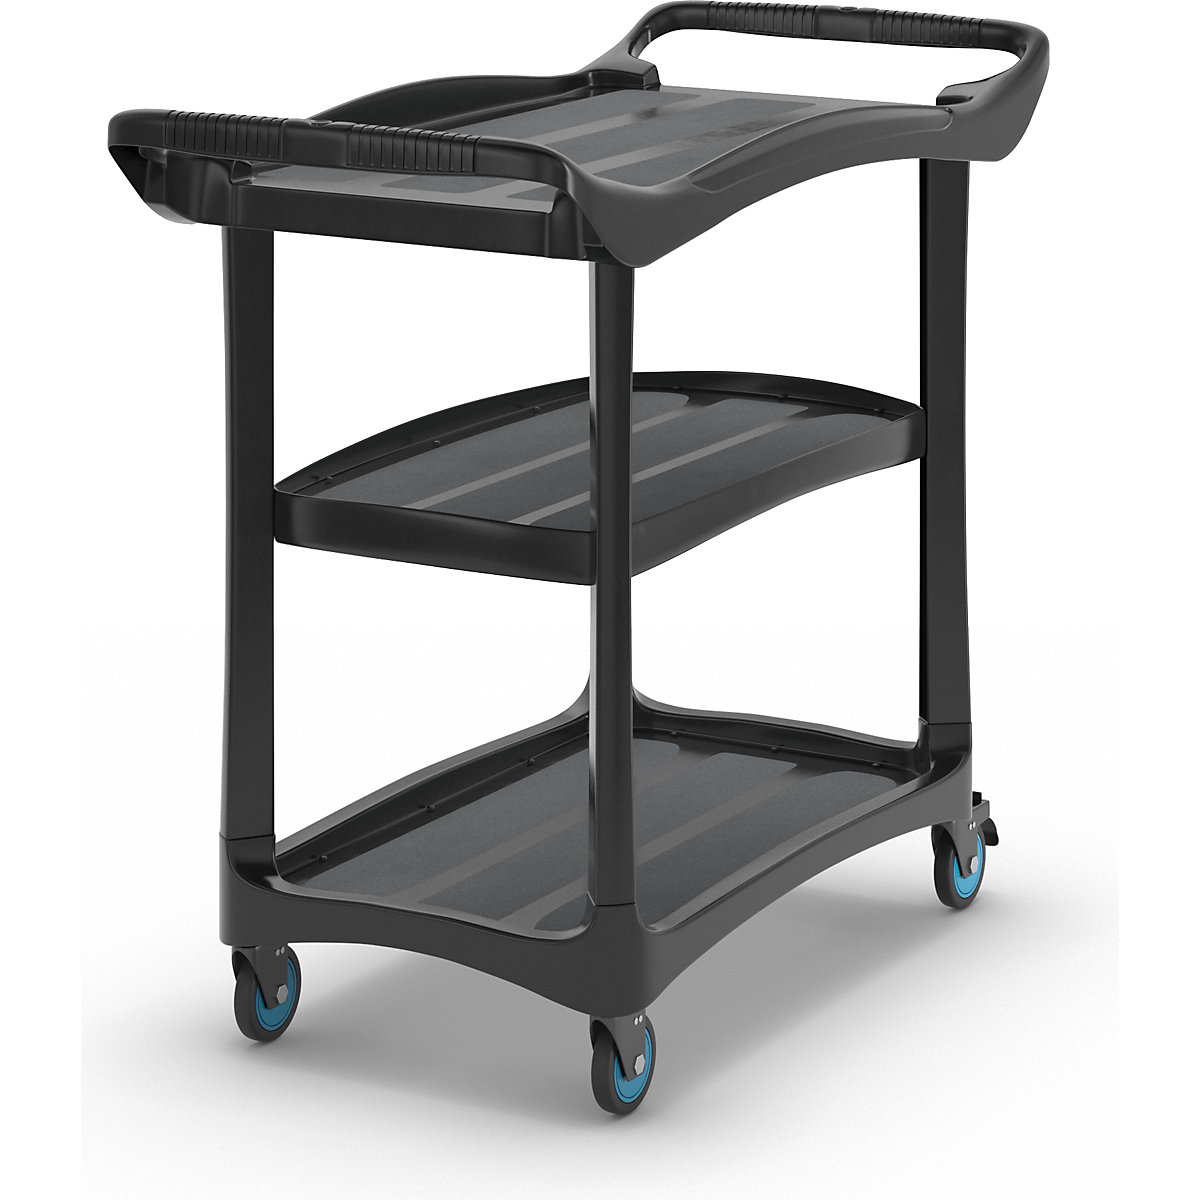 Serving trolley with 3 shelves